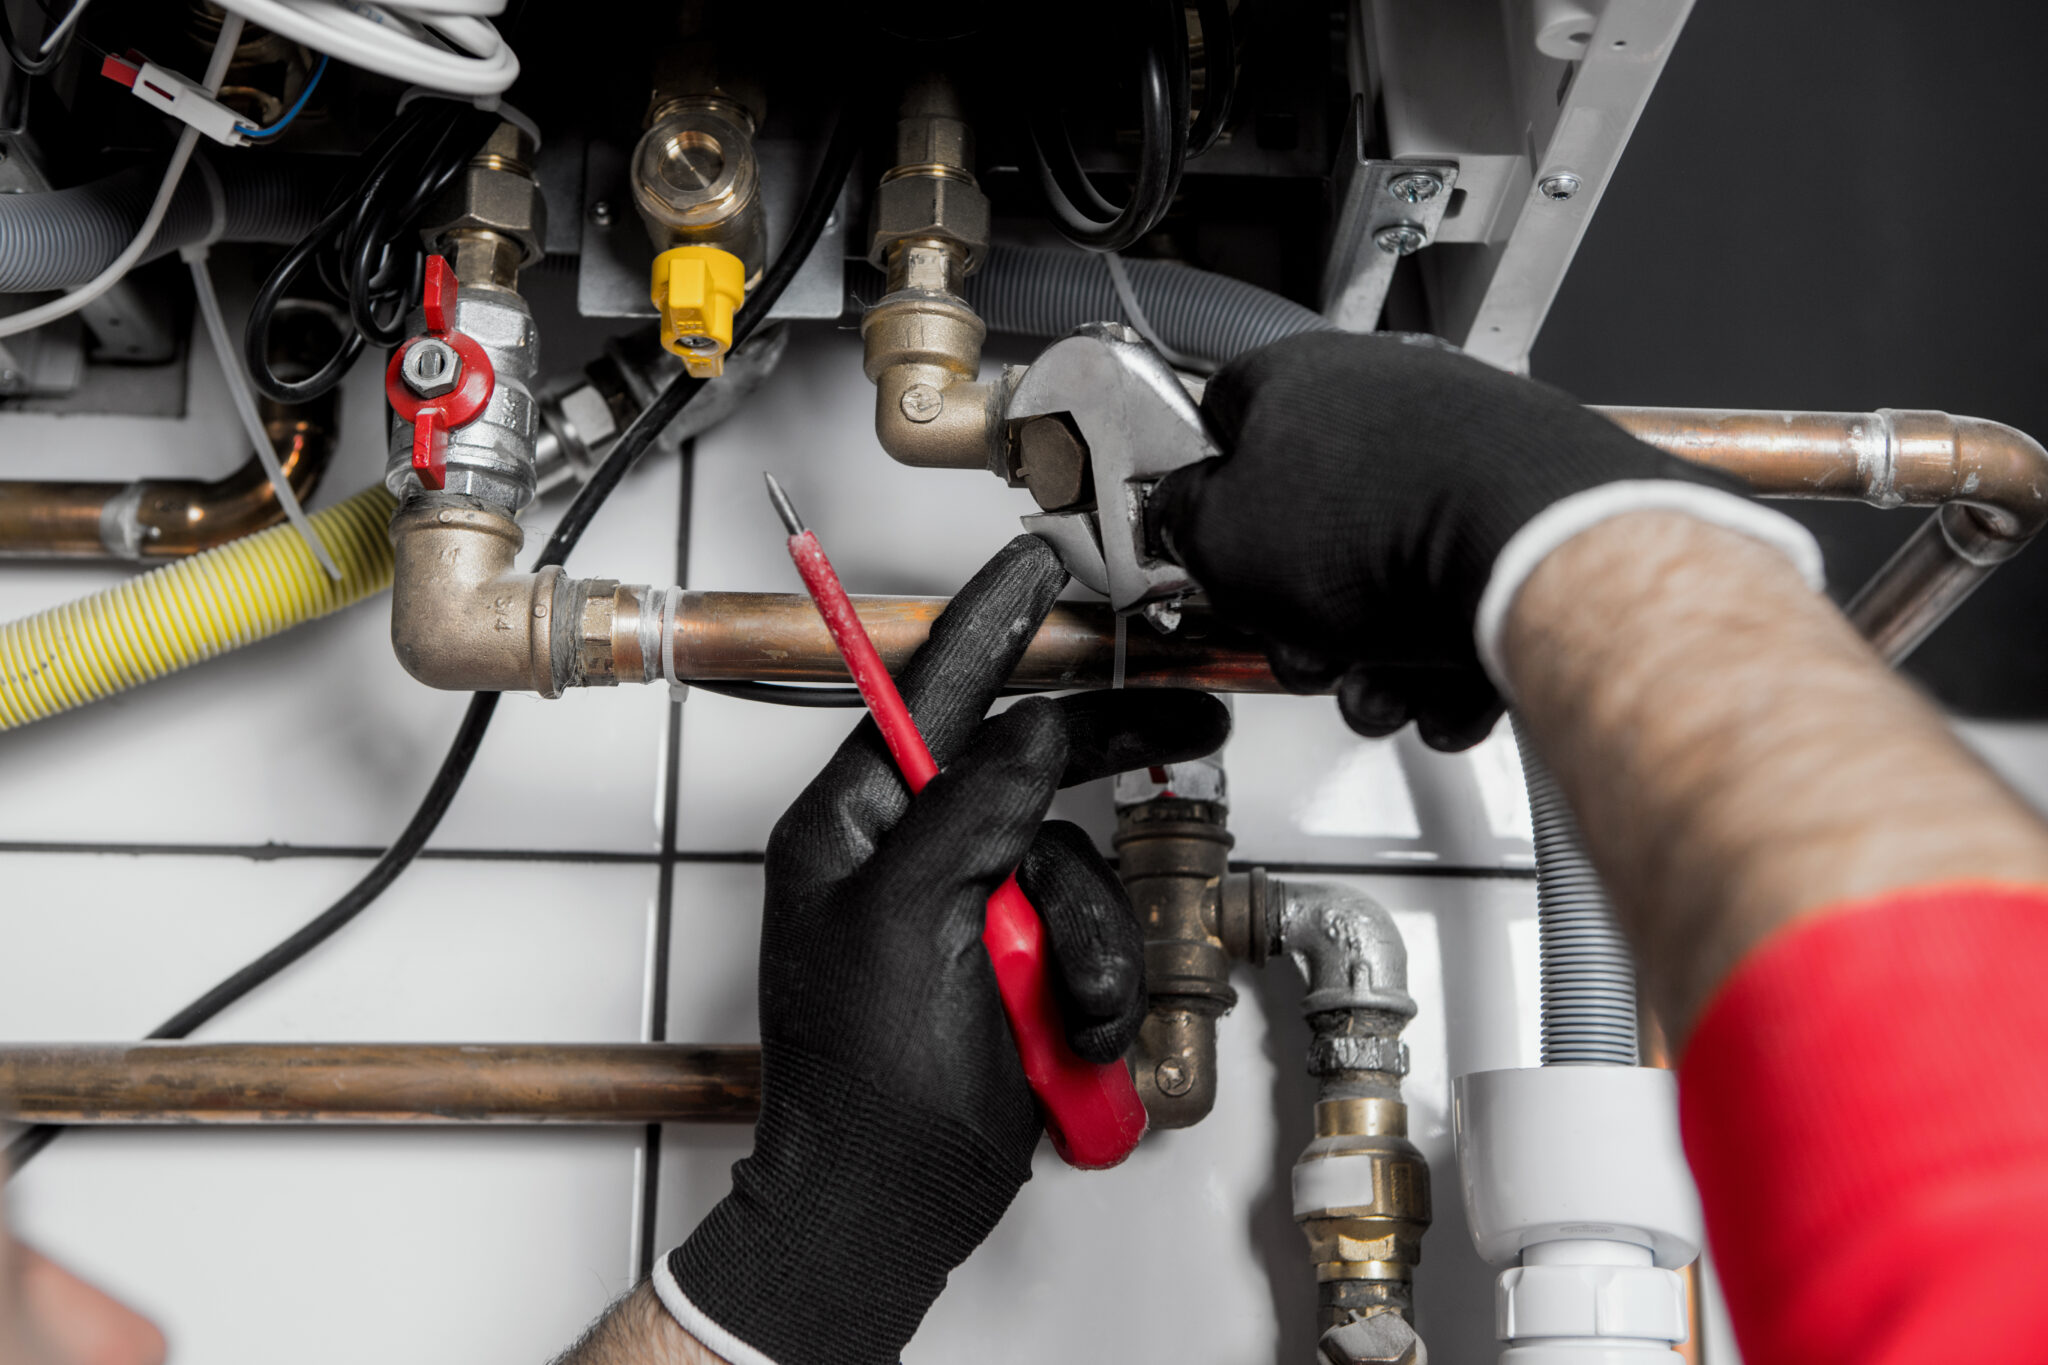 Guide To Gas Hot Water Installation and Replacement | All Day Plumbing